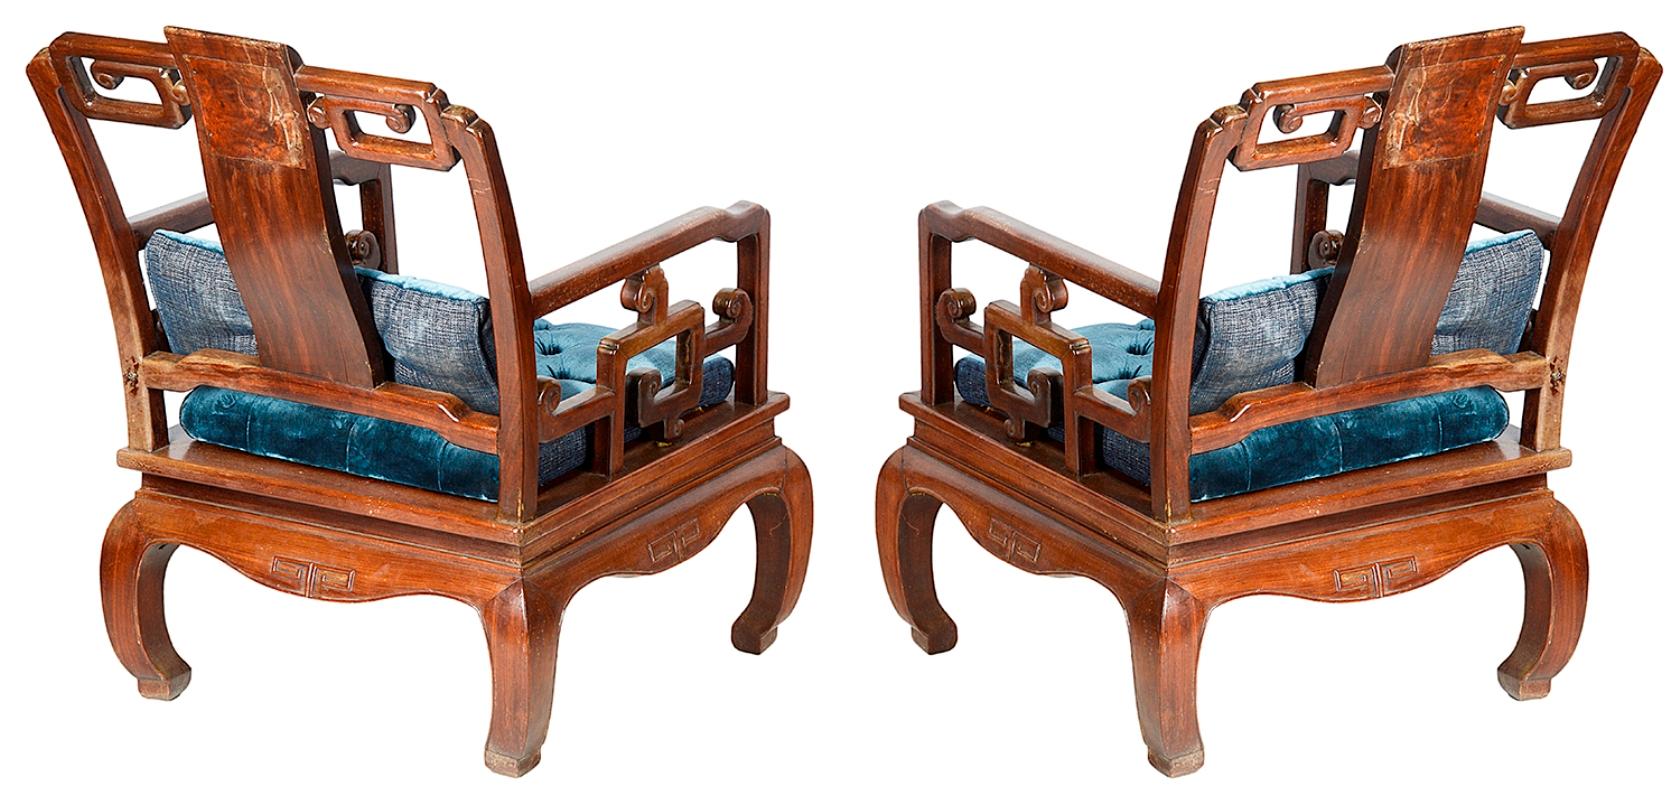 An unusual pair of late 19th century Chinese hardwood armchairs, each with inset blue and white porcelain panels, scrolling pierced decoration, blue velvet upholstered cushions, raised on scrolling carved legs.